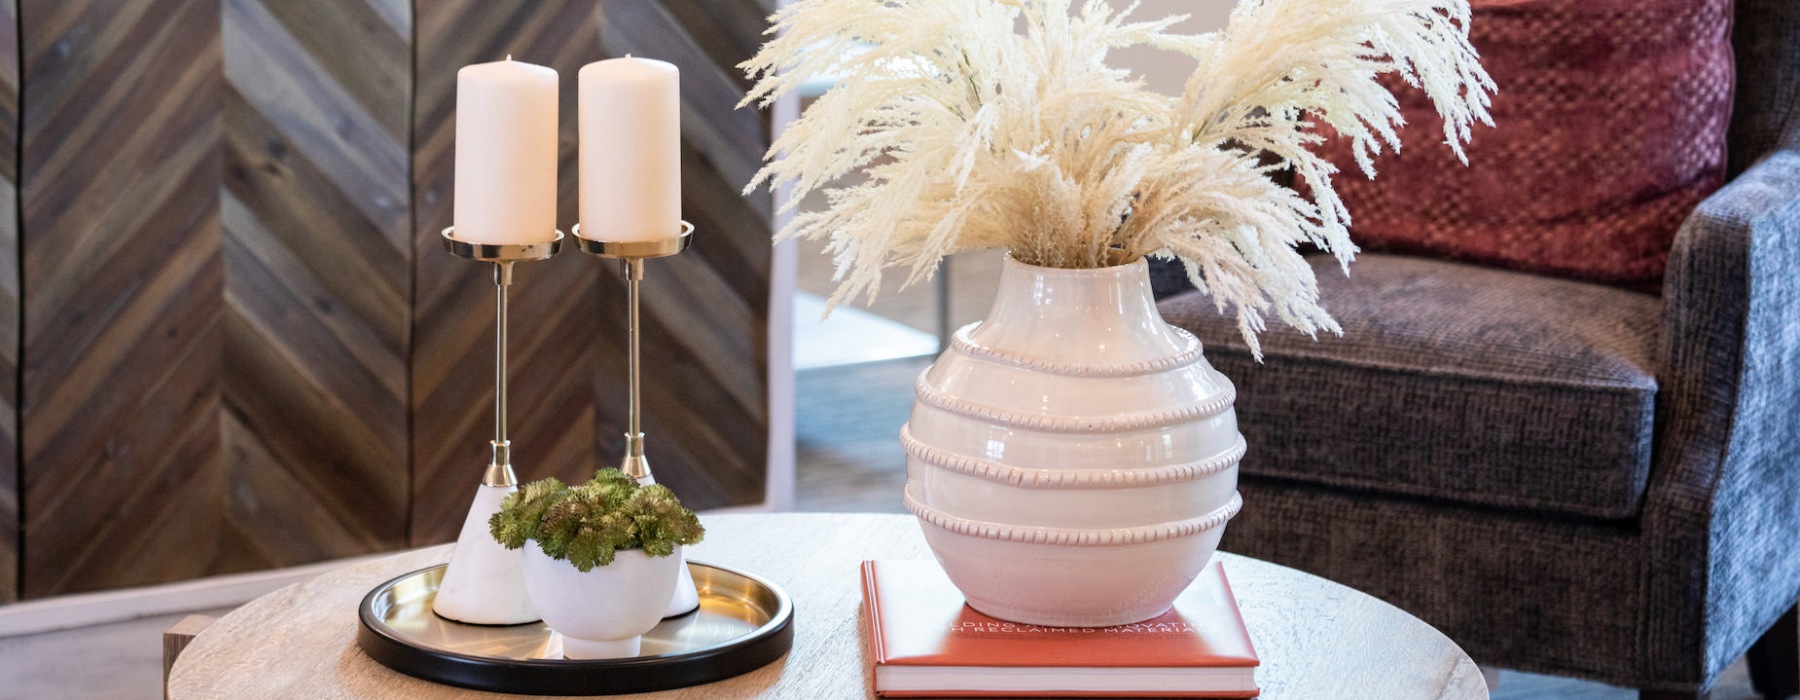 decorative items sitting on a table